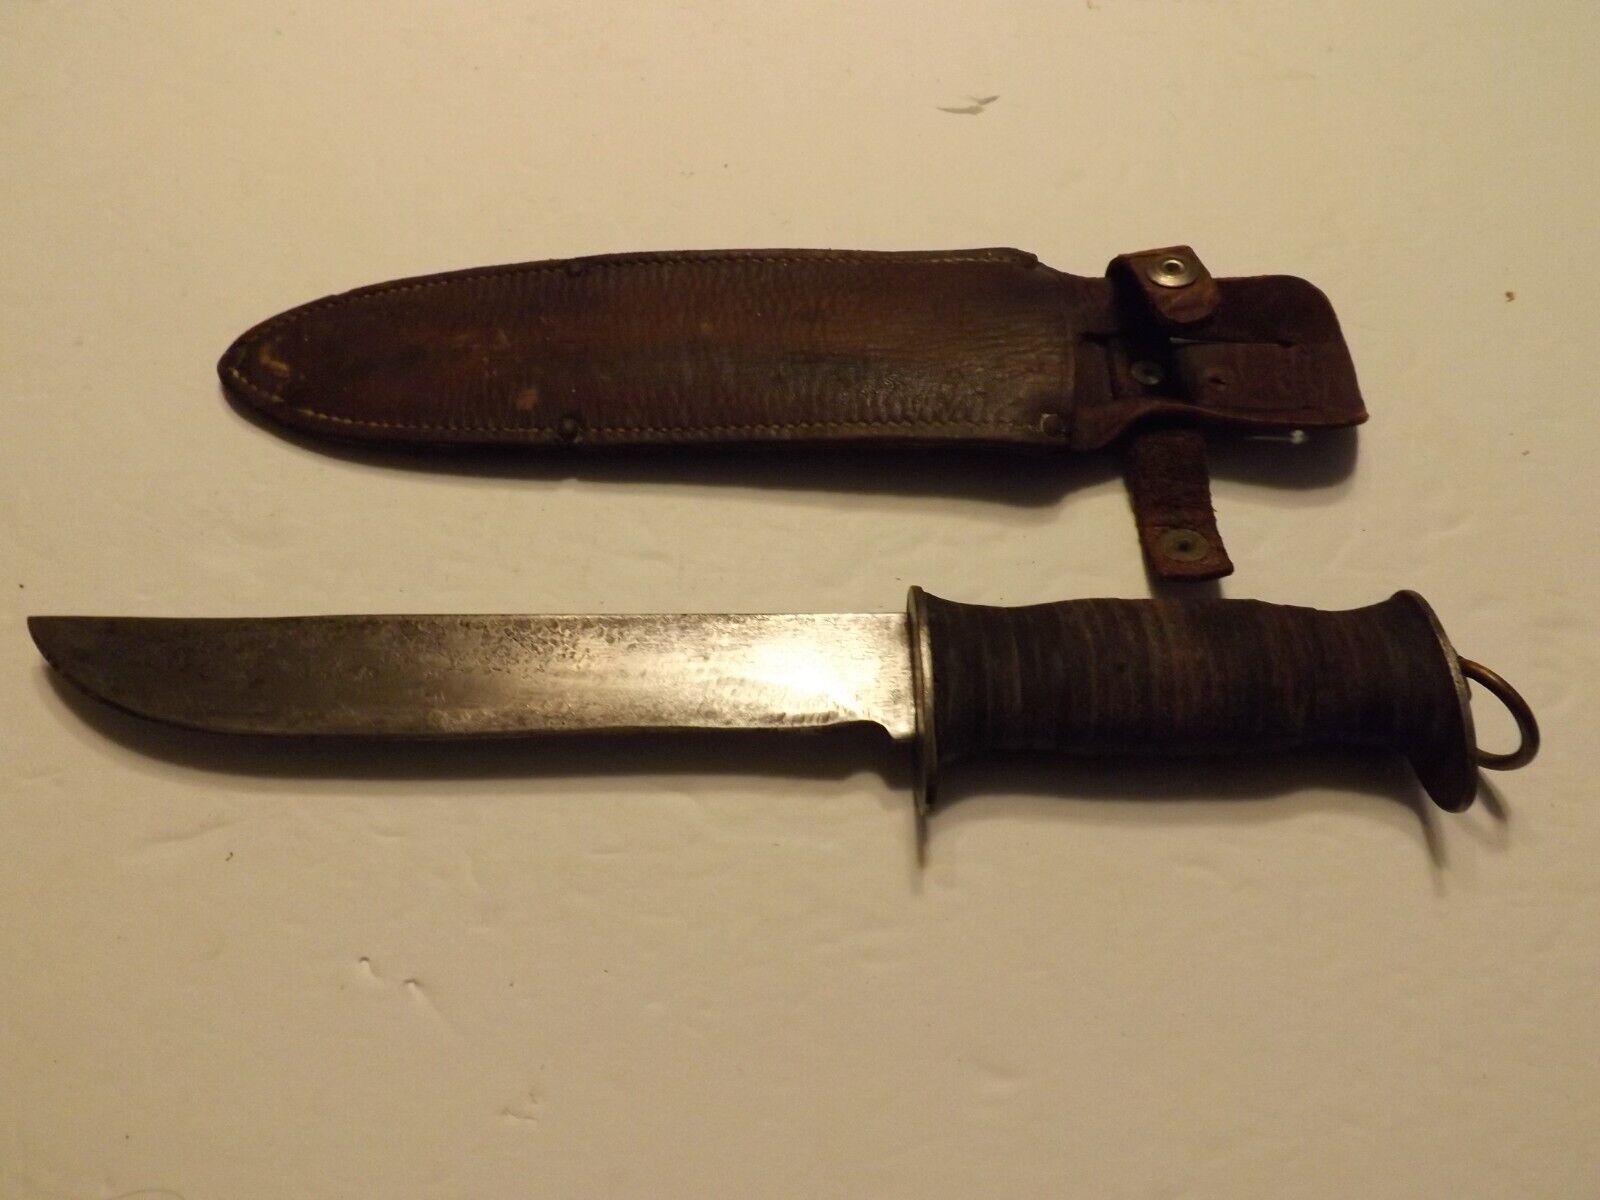 VINTAGE UNKNOWN MAKER FIXED BLADE KNIFE W/STACKED LEATHER HANDLE W/SHEATH